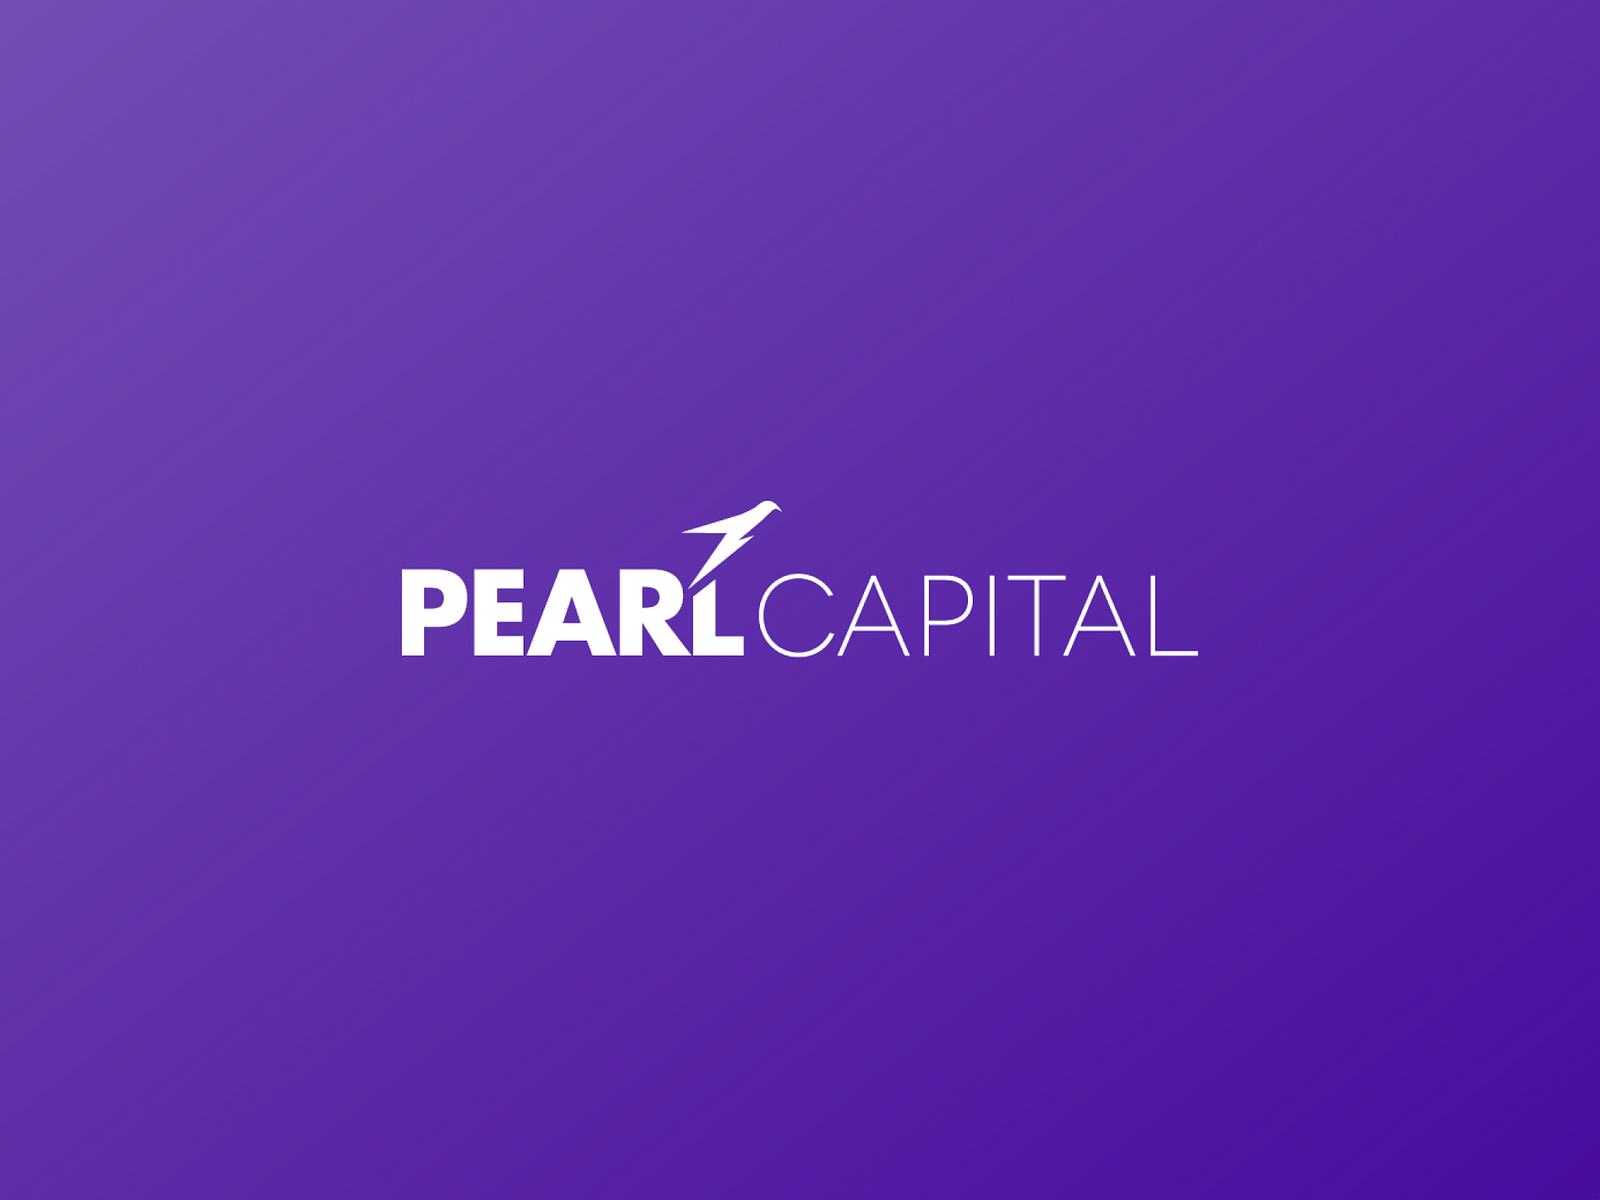 Pearl Capital by Be Indigo on Dribbble